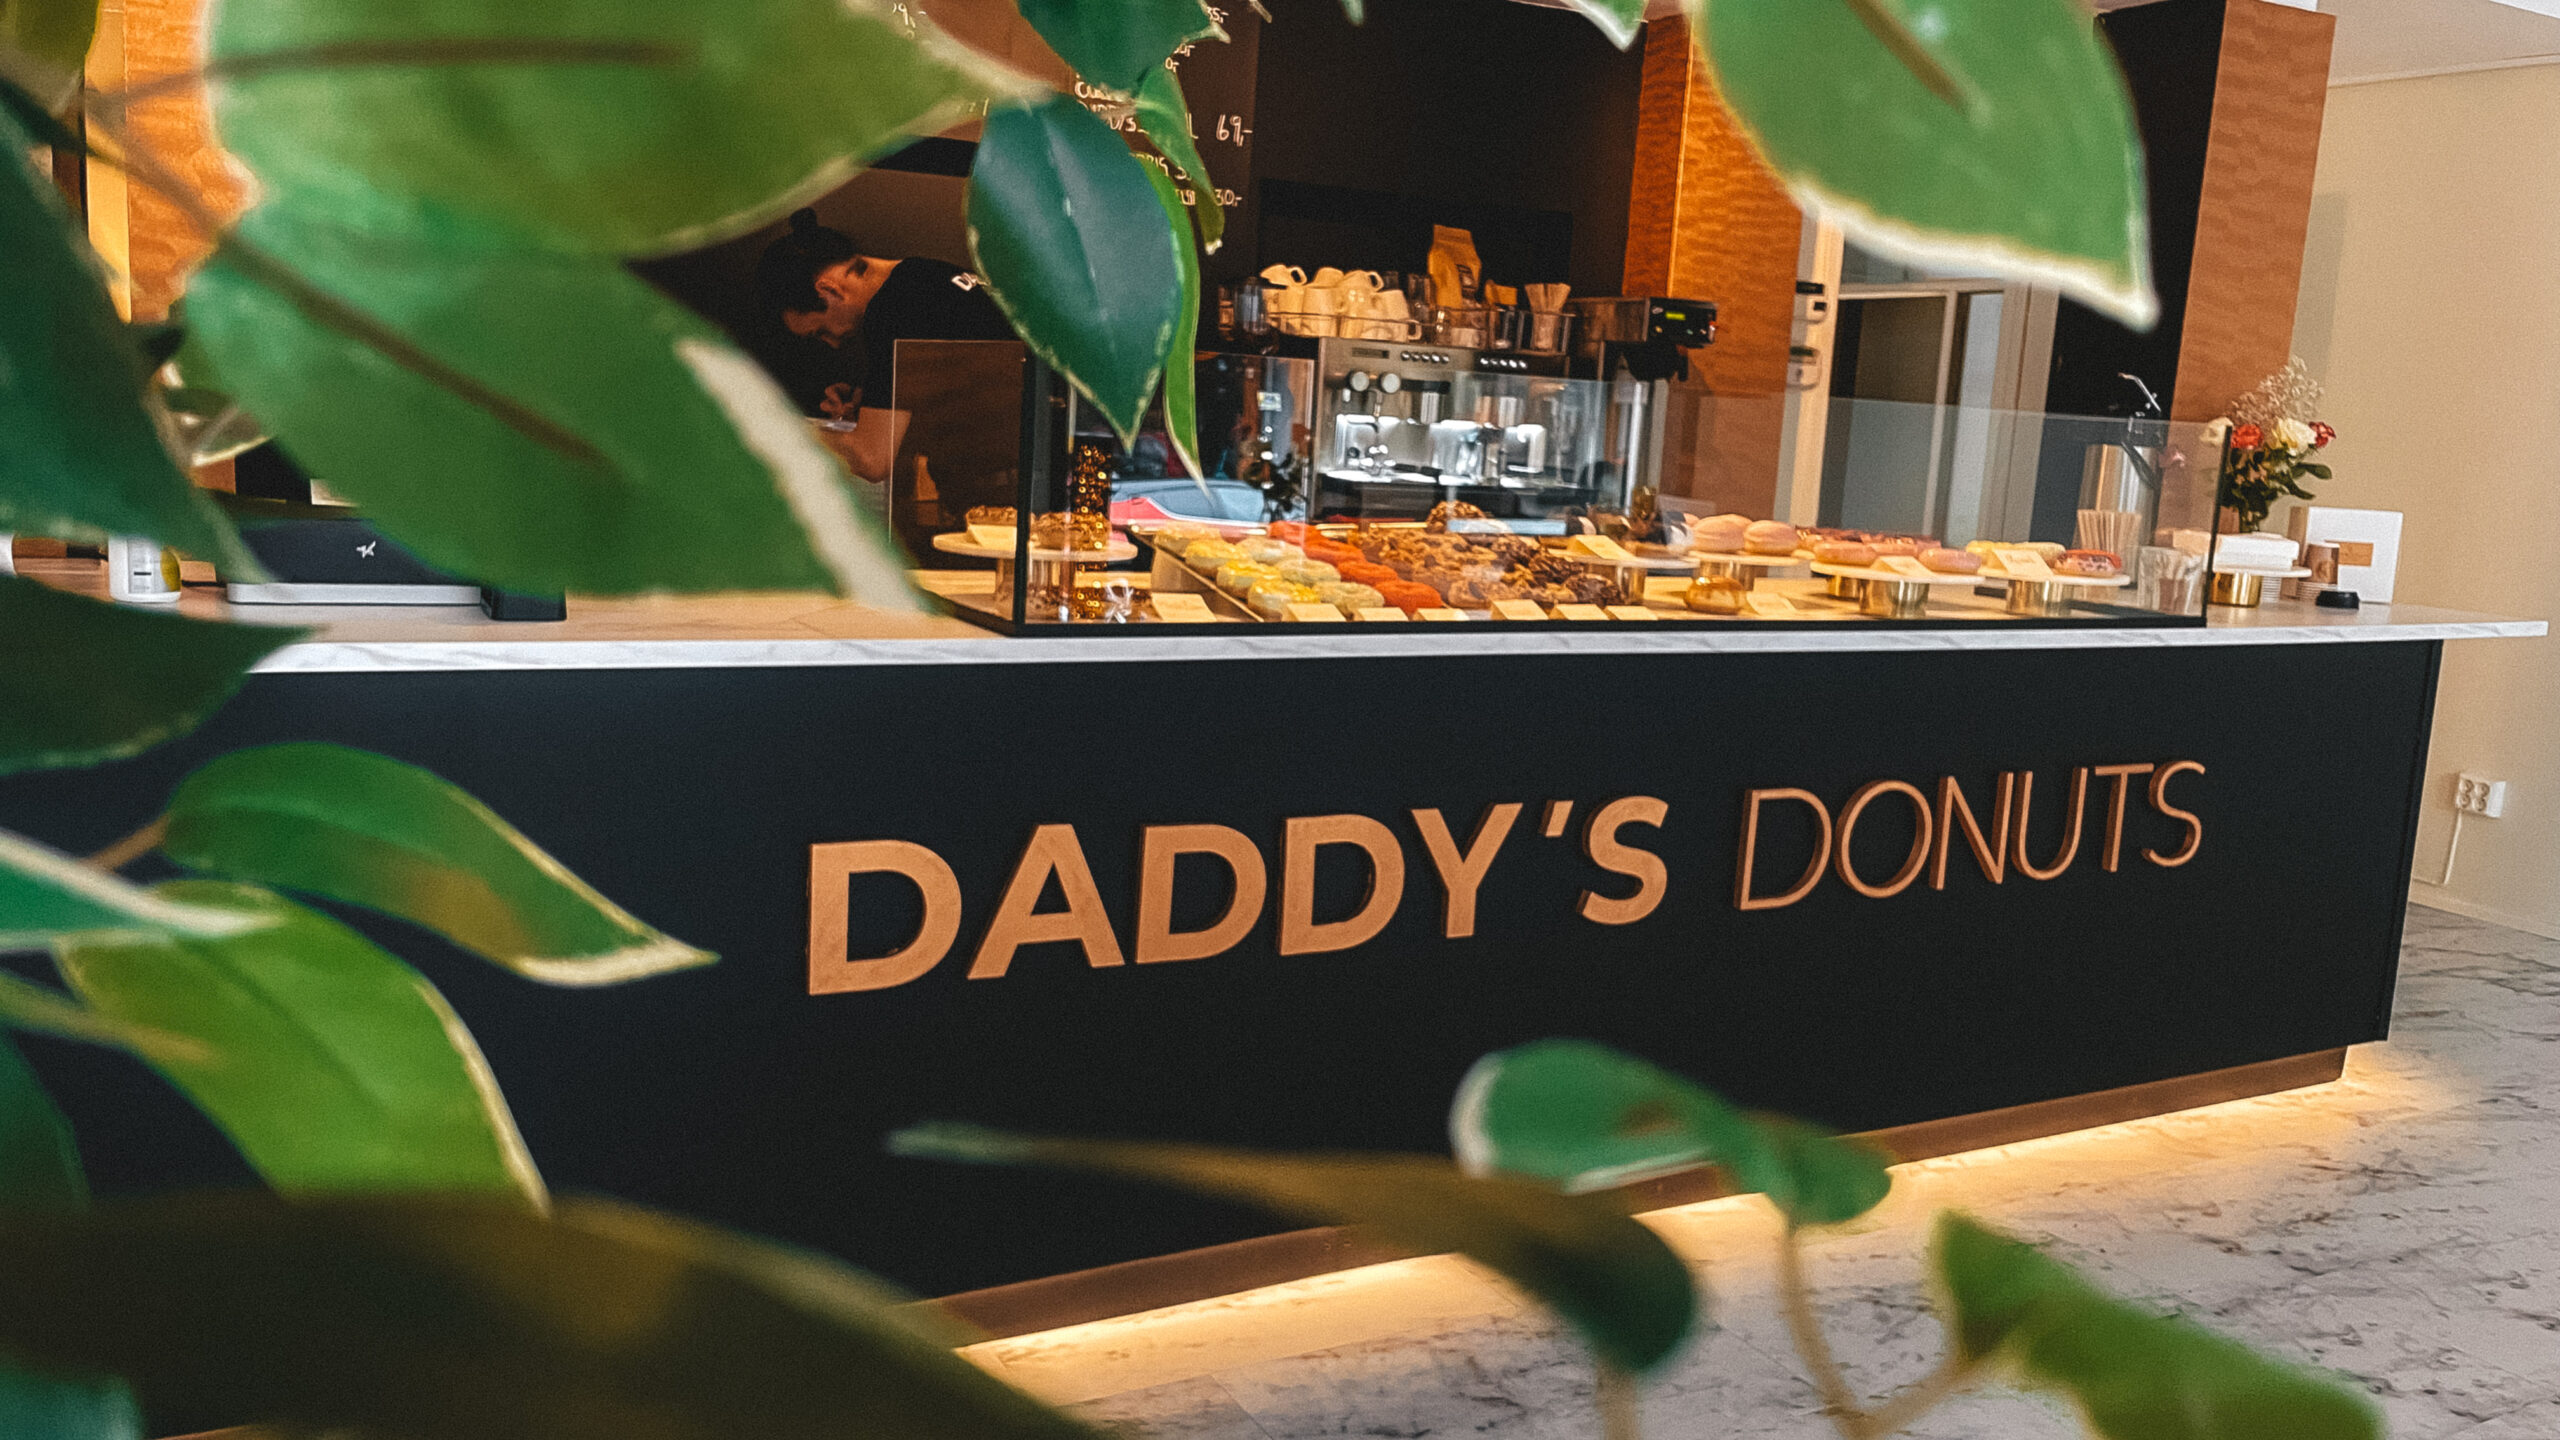 Featured image for “Daddys Donuts”